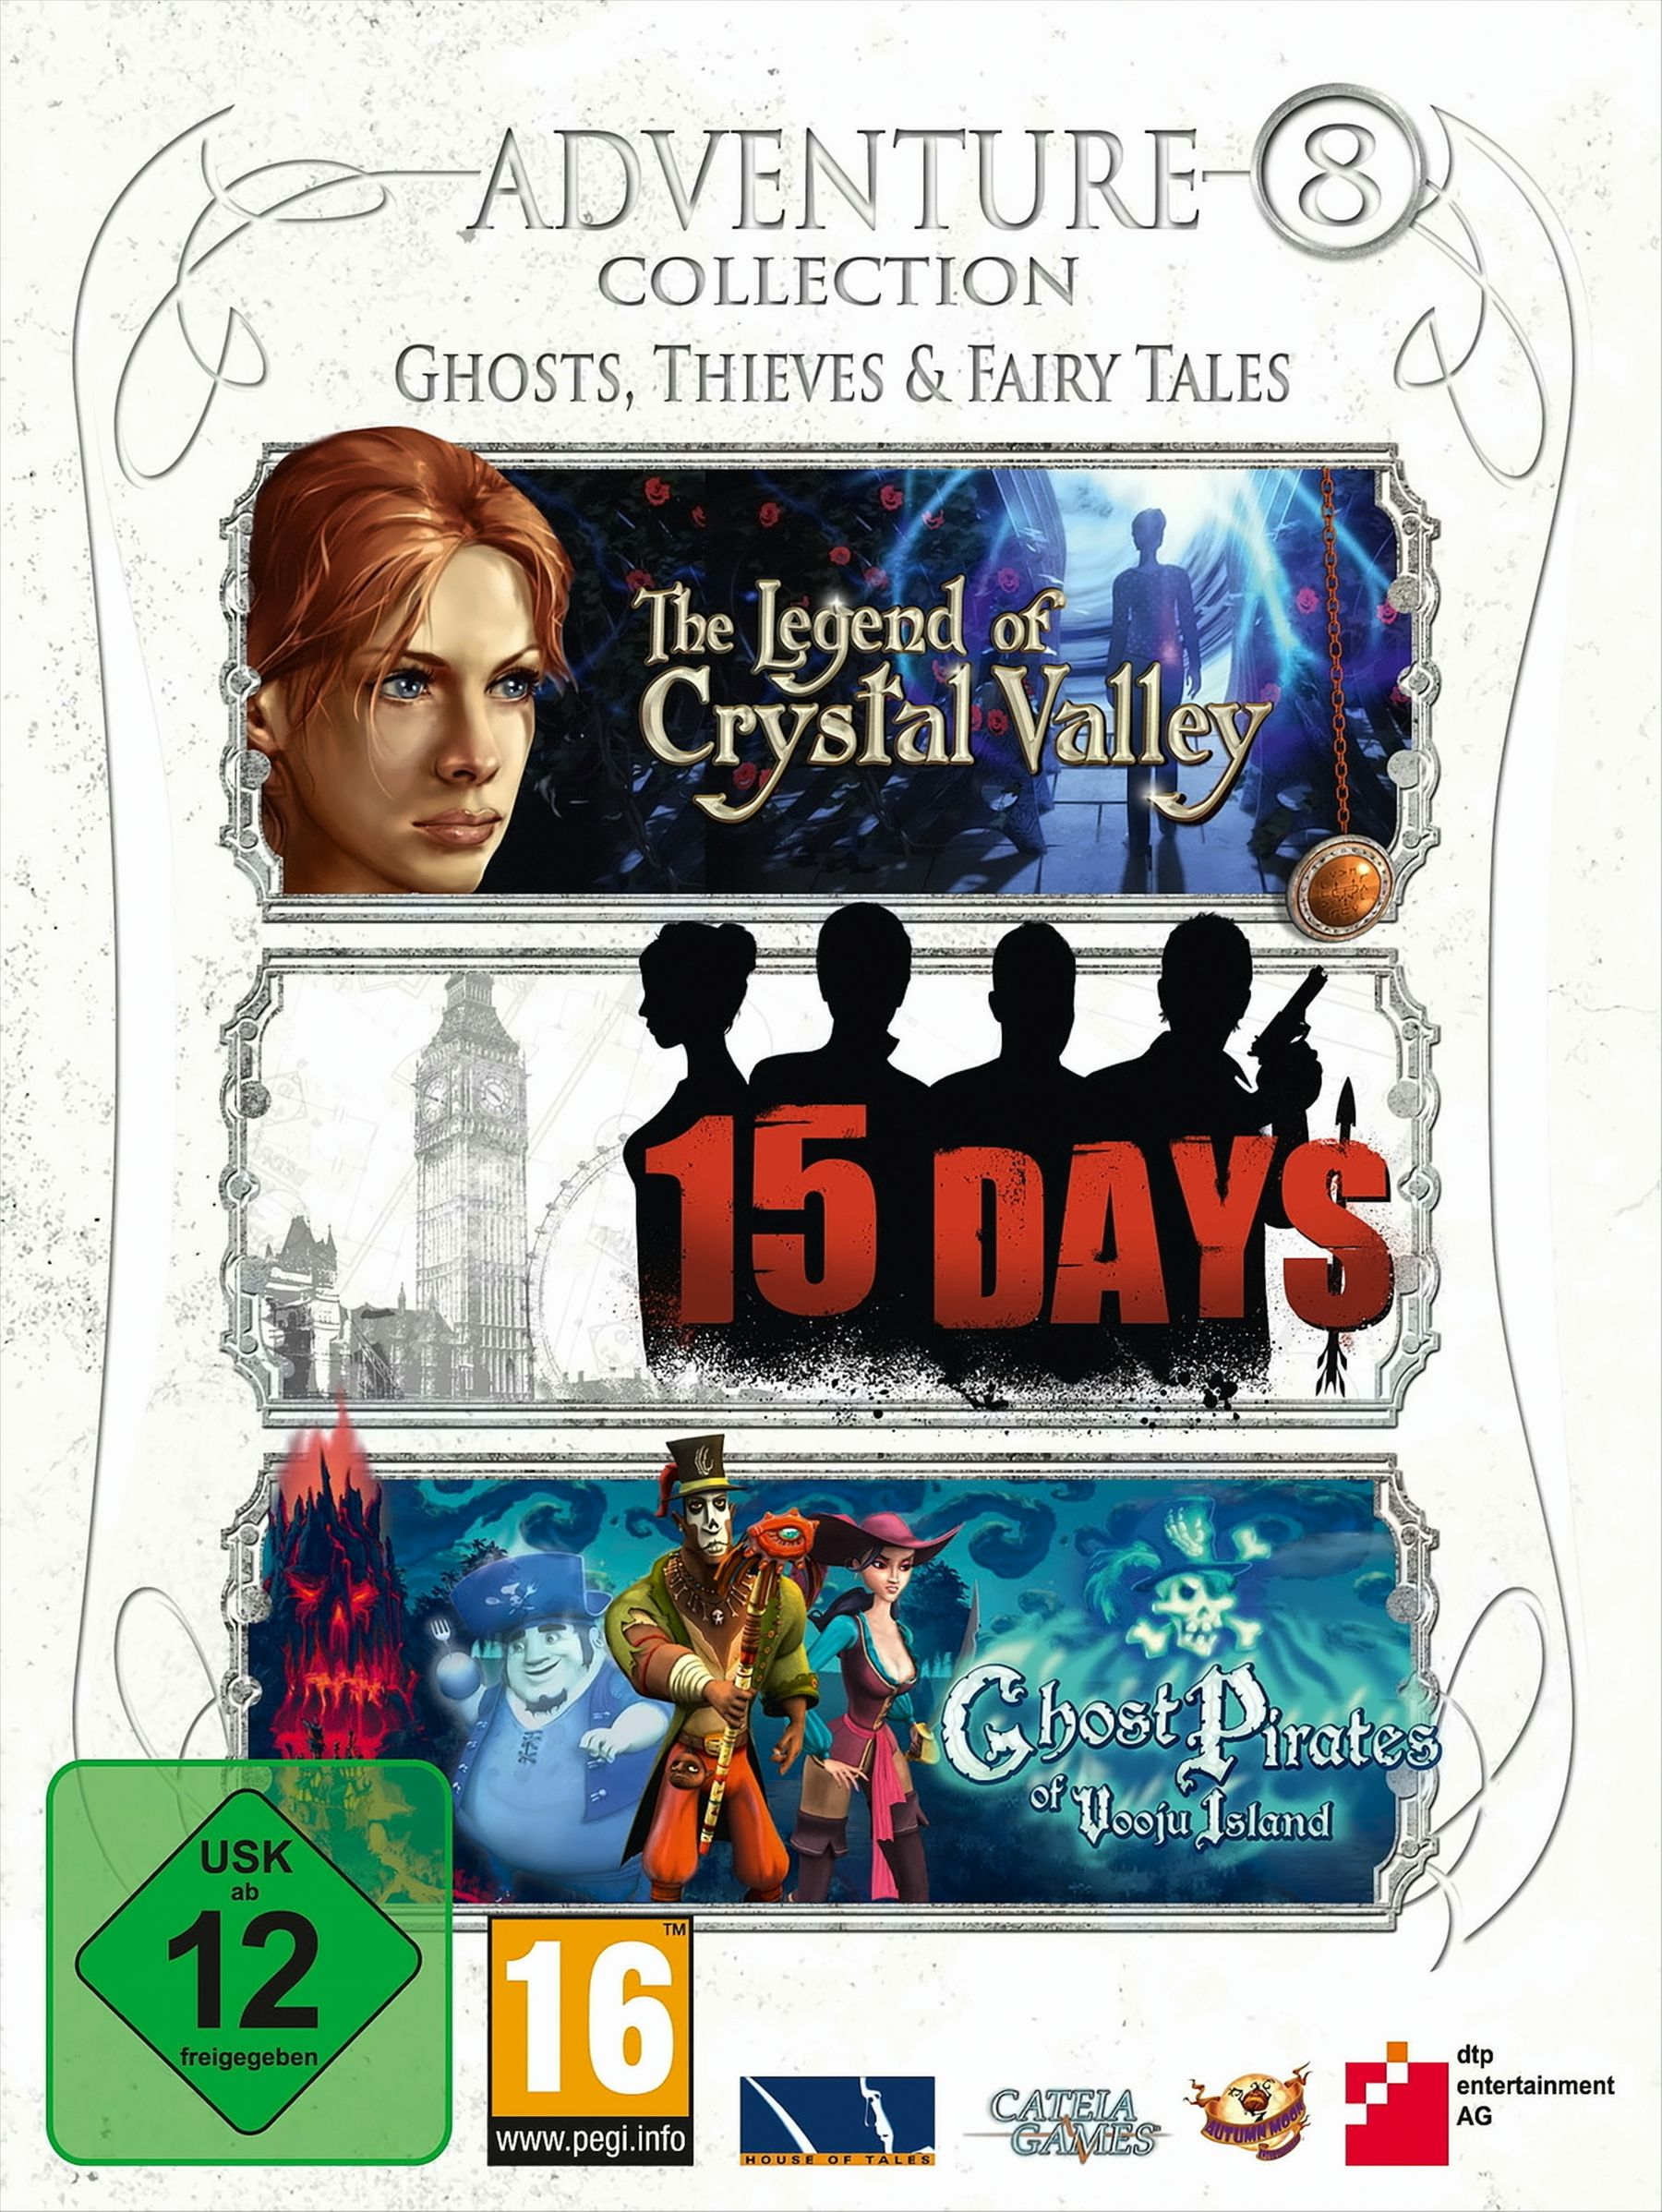 Adventure Collection 8 - Ghosts, - Tales [PC] & Thieves Fairy